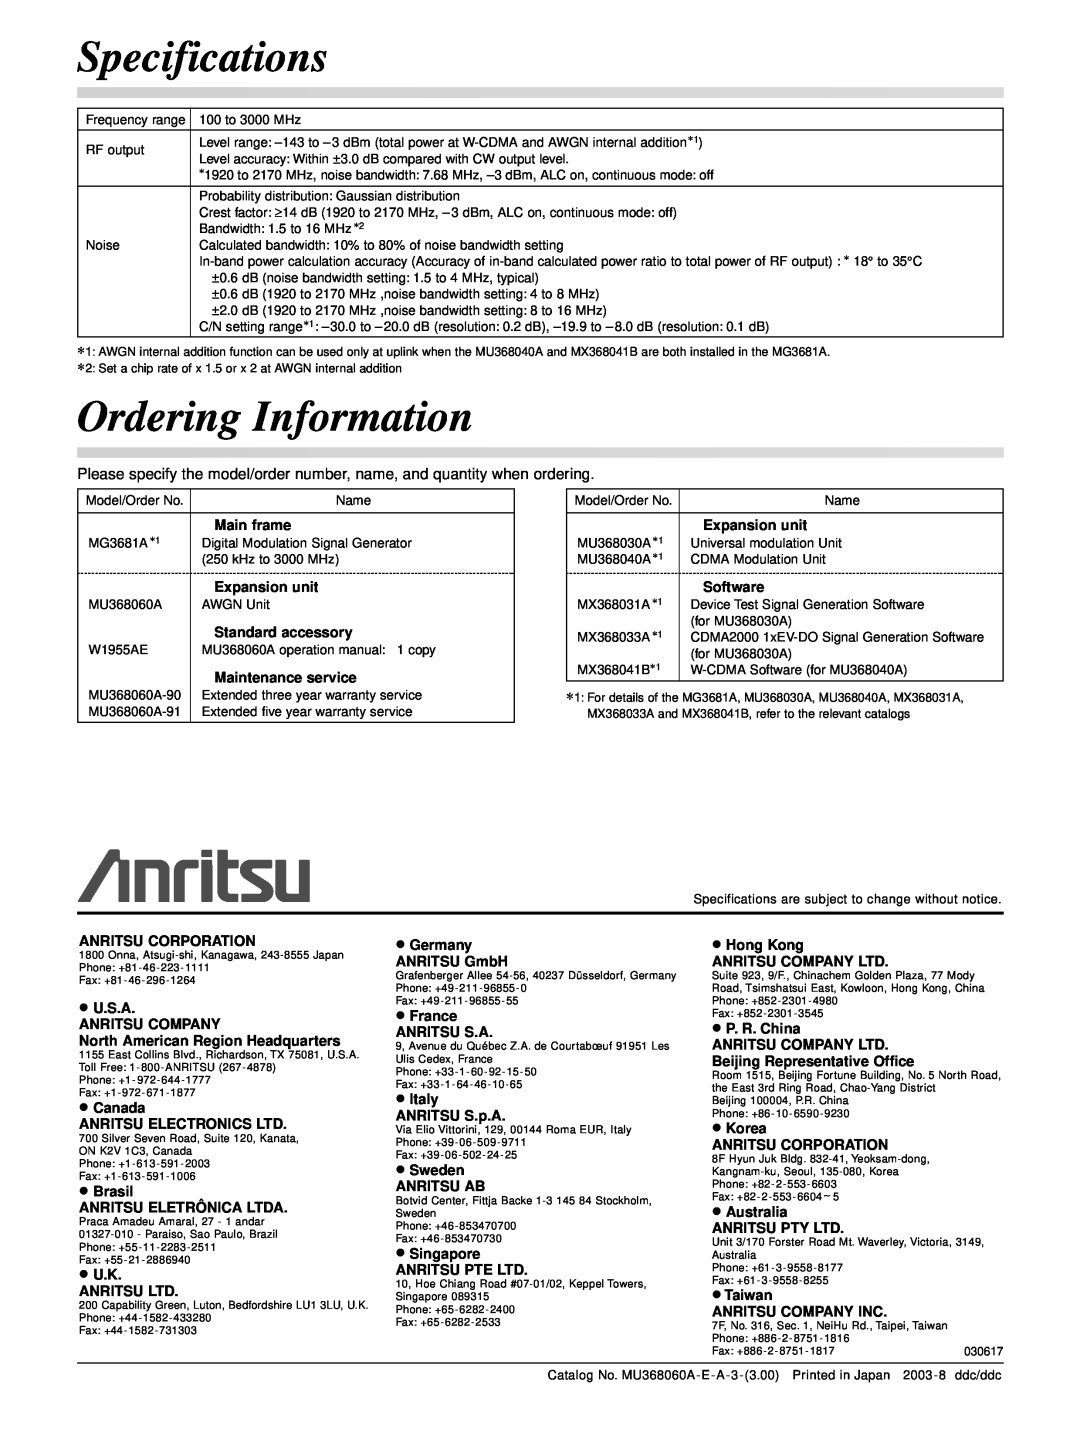 Anritsu MG3681A manual Specifications, Ordering Information 